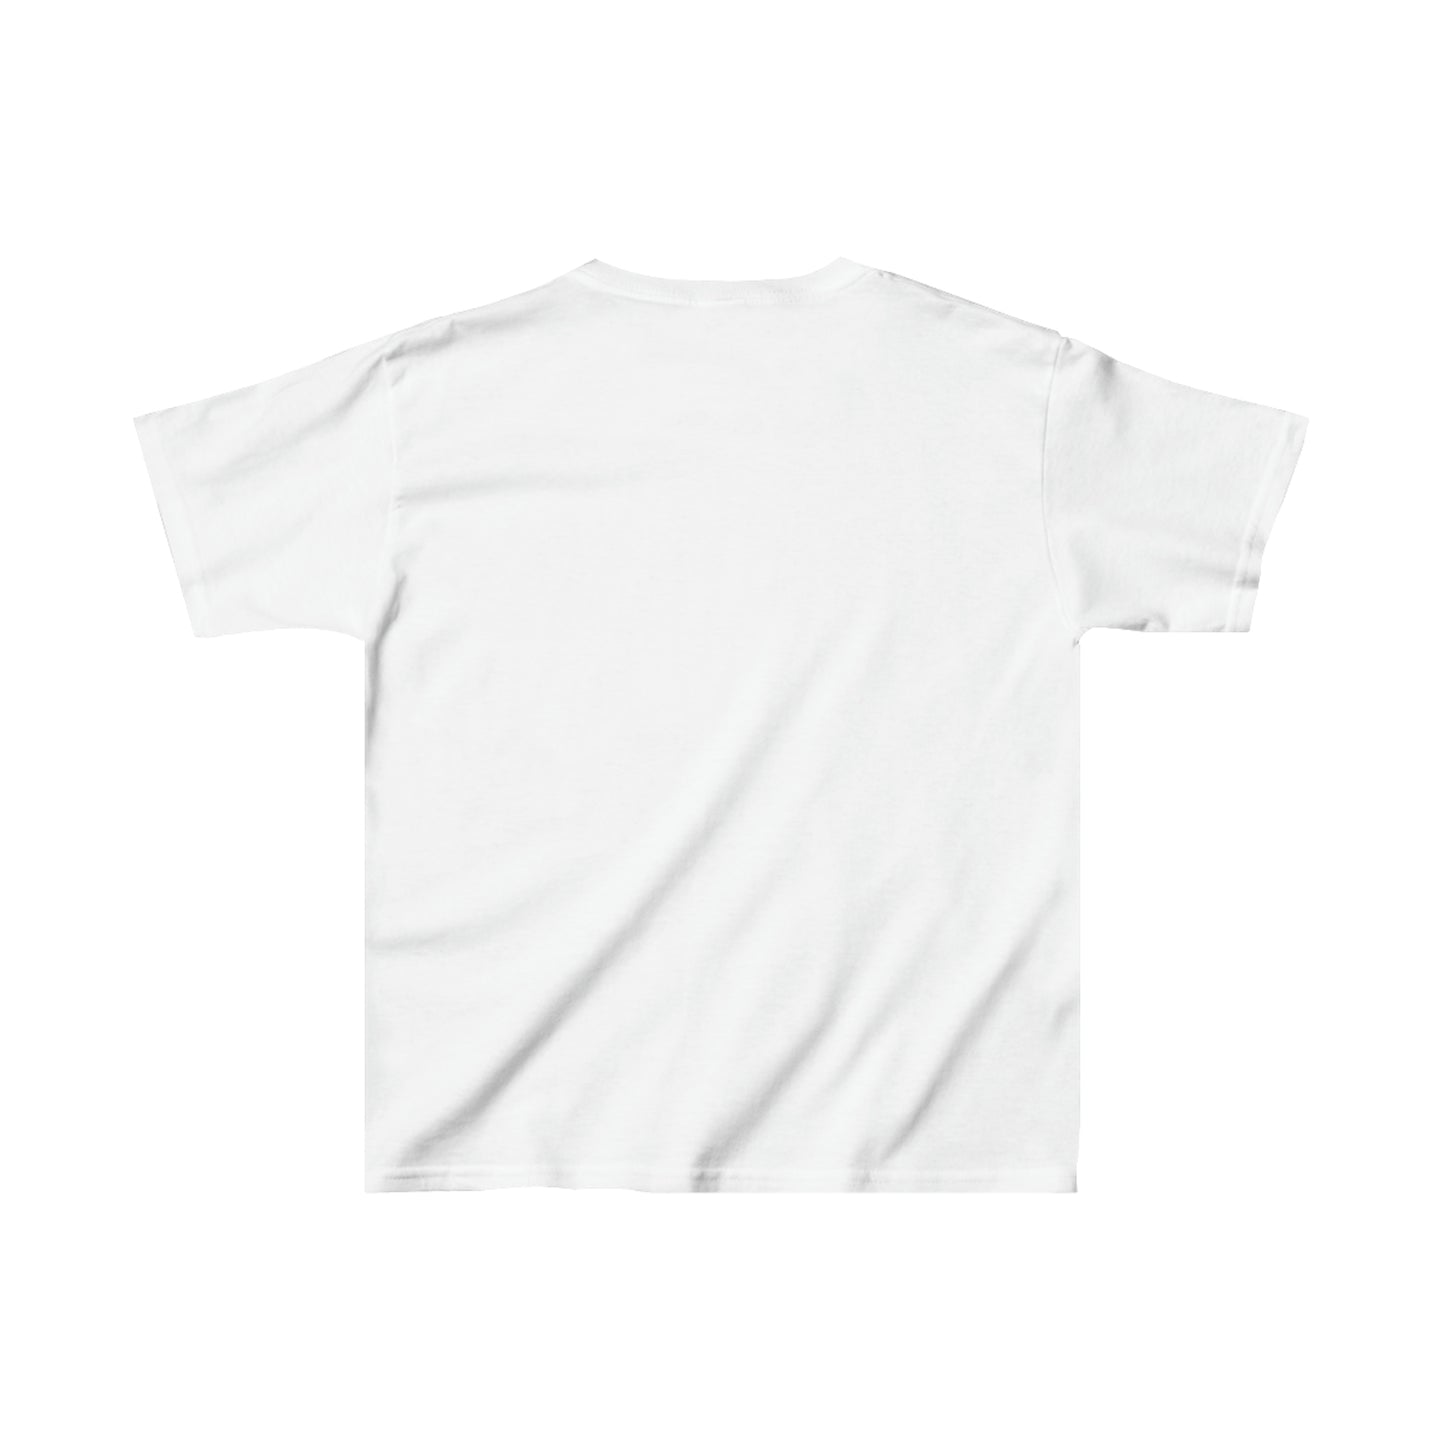 941s Finest Youth Tee